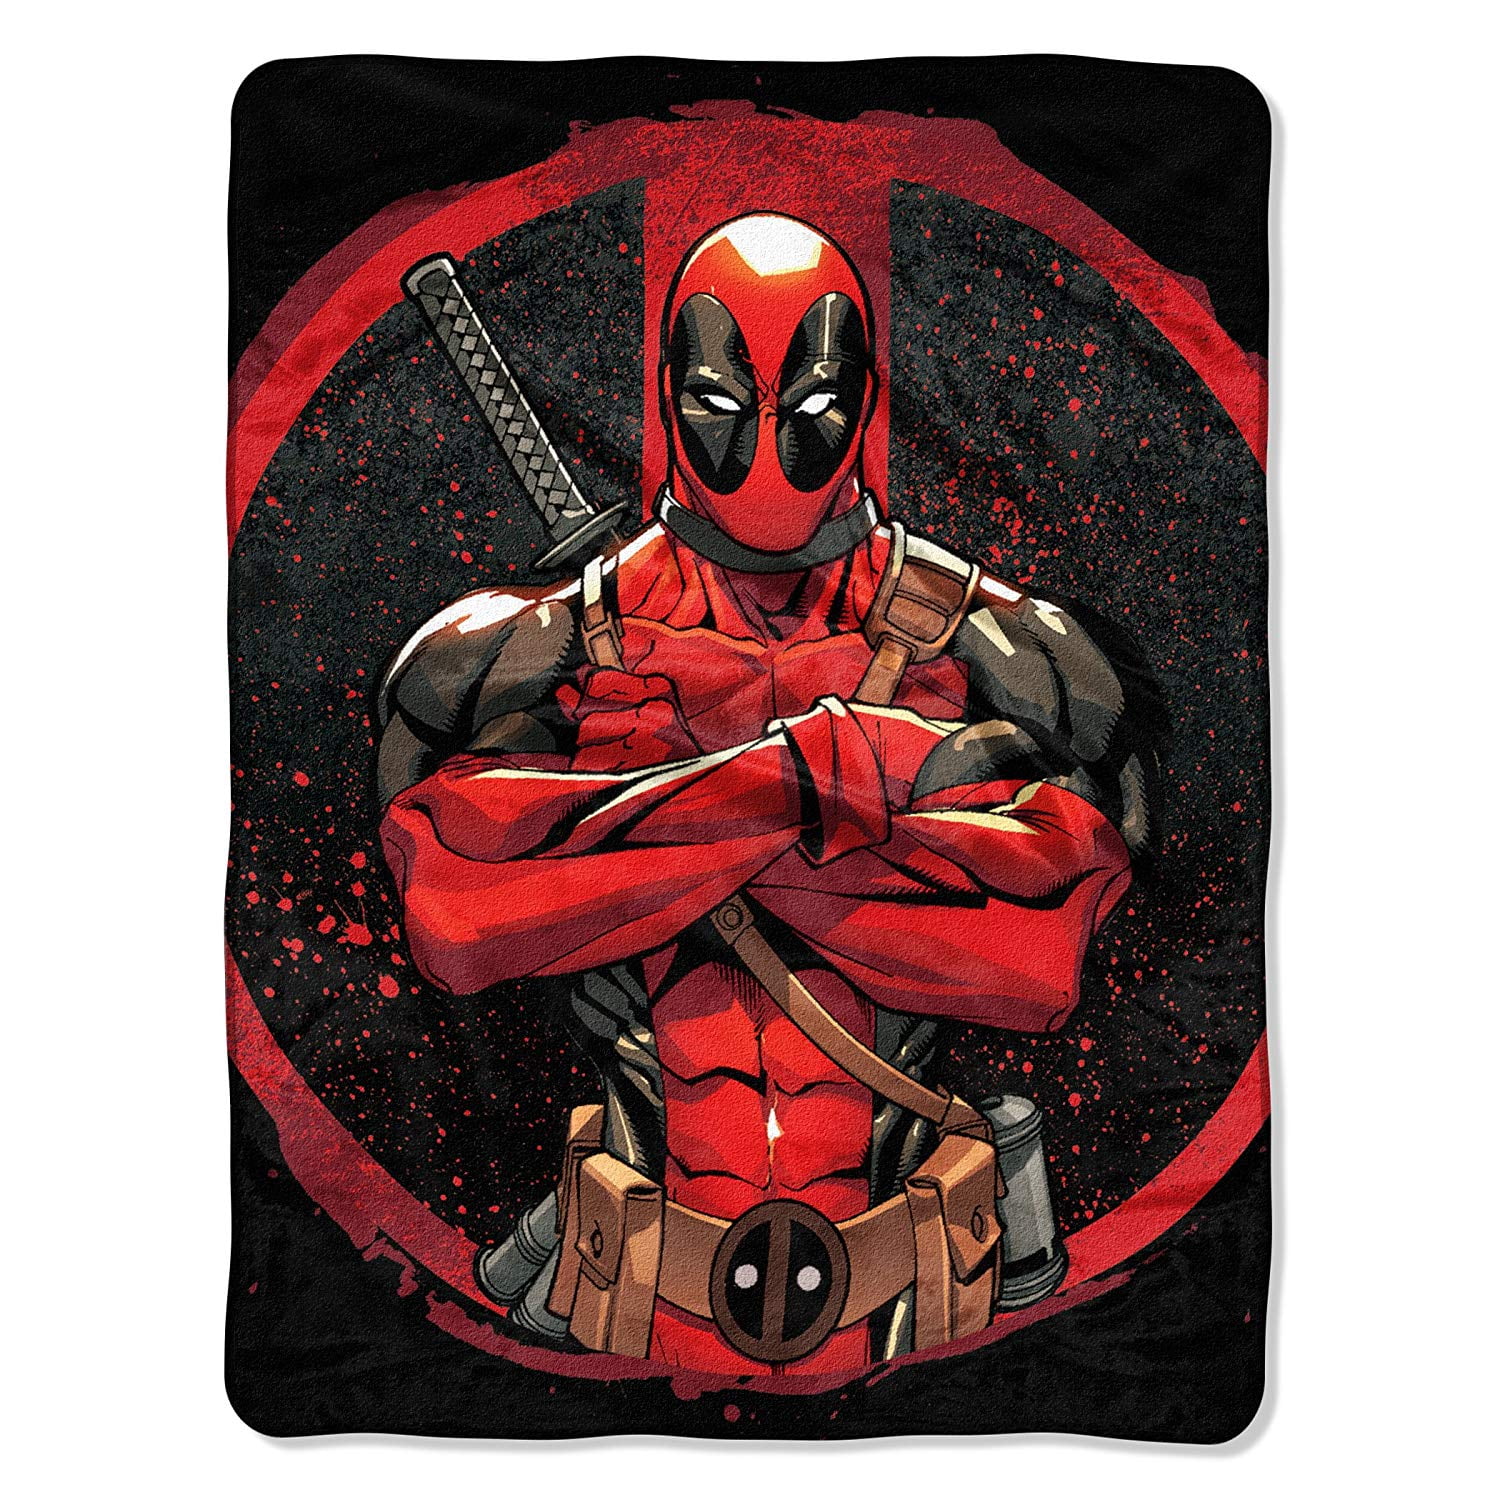  Marvel Deadpool Beach Towel Set for Kids and Adults - Bundle  with Deadpool Cotton Pool Towel Plus Avengers Decal and More (Deadpool  Gifts, Deadpool Merchandise) : Home & Kitchen